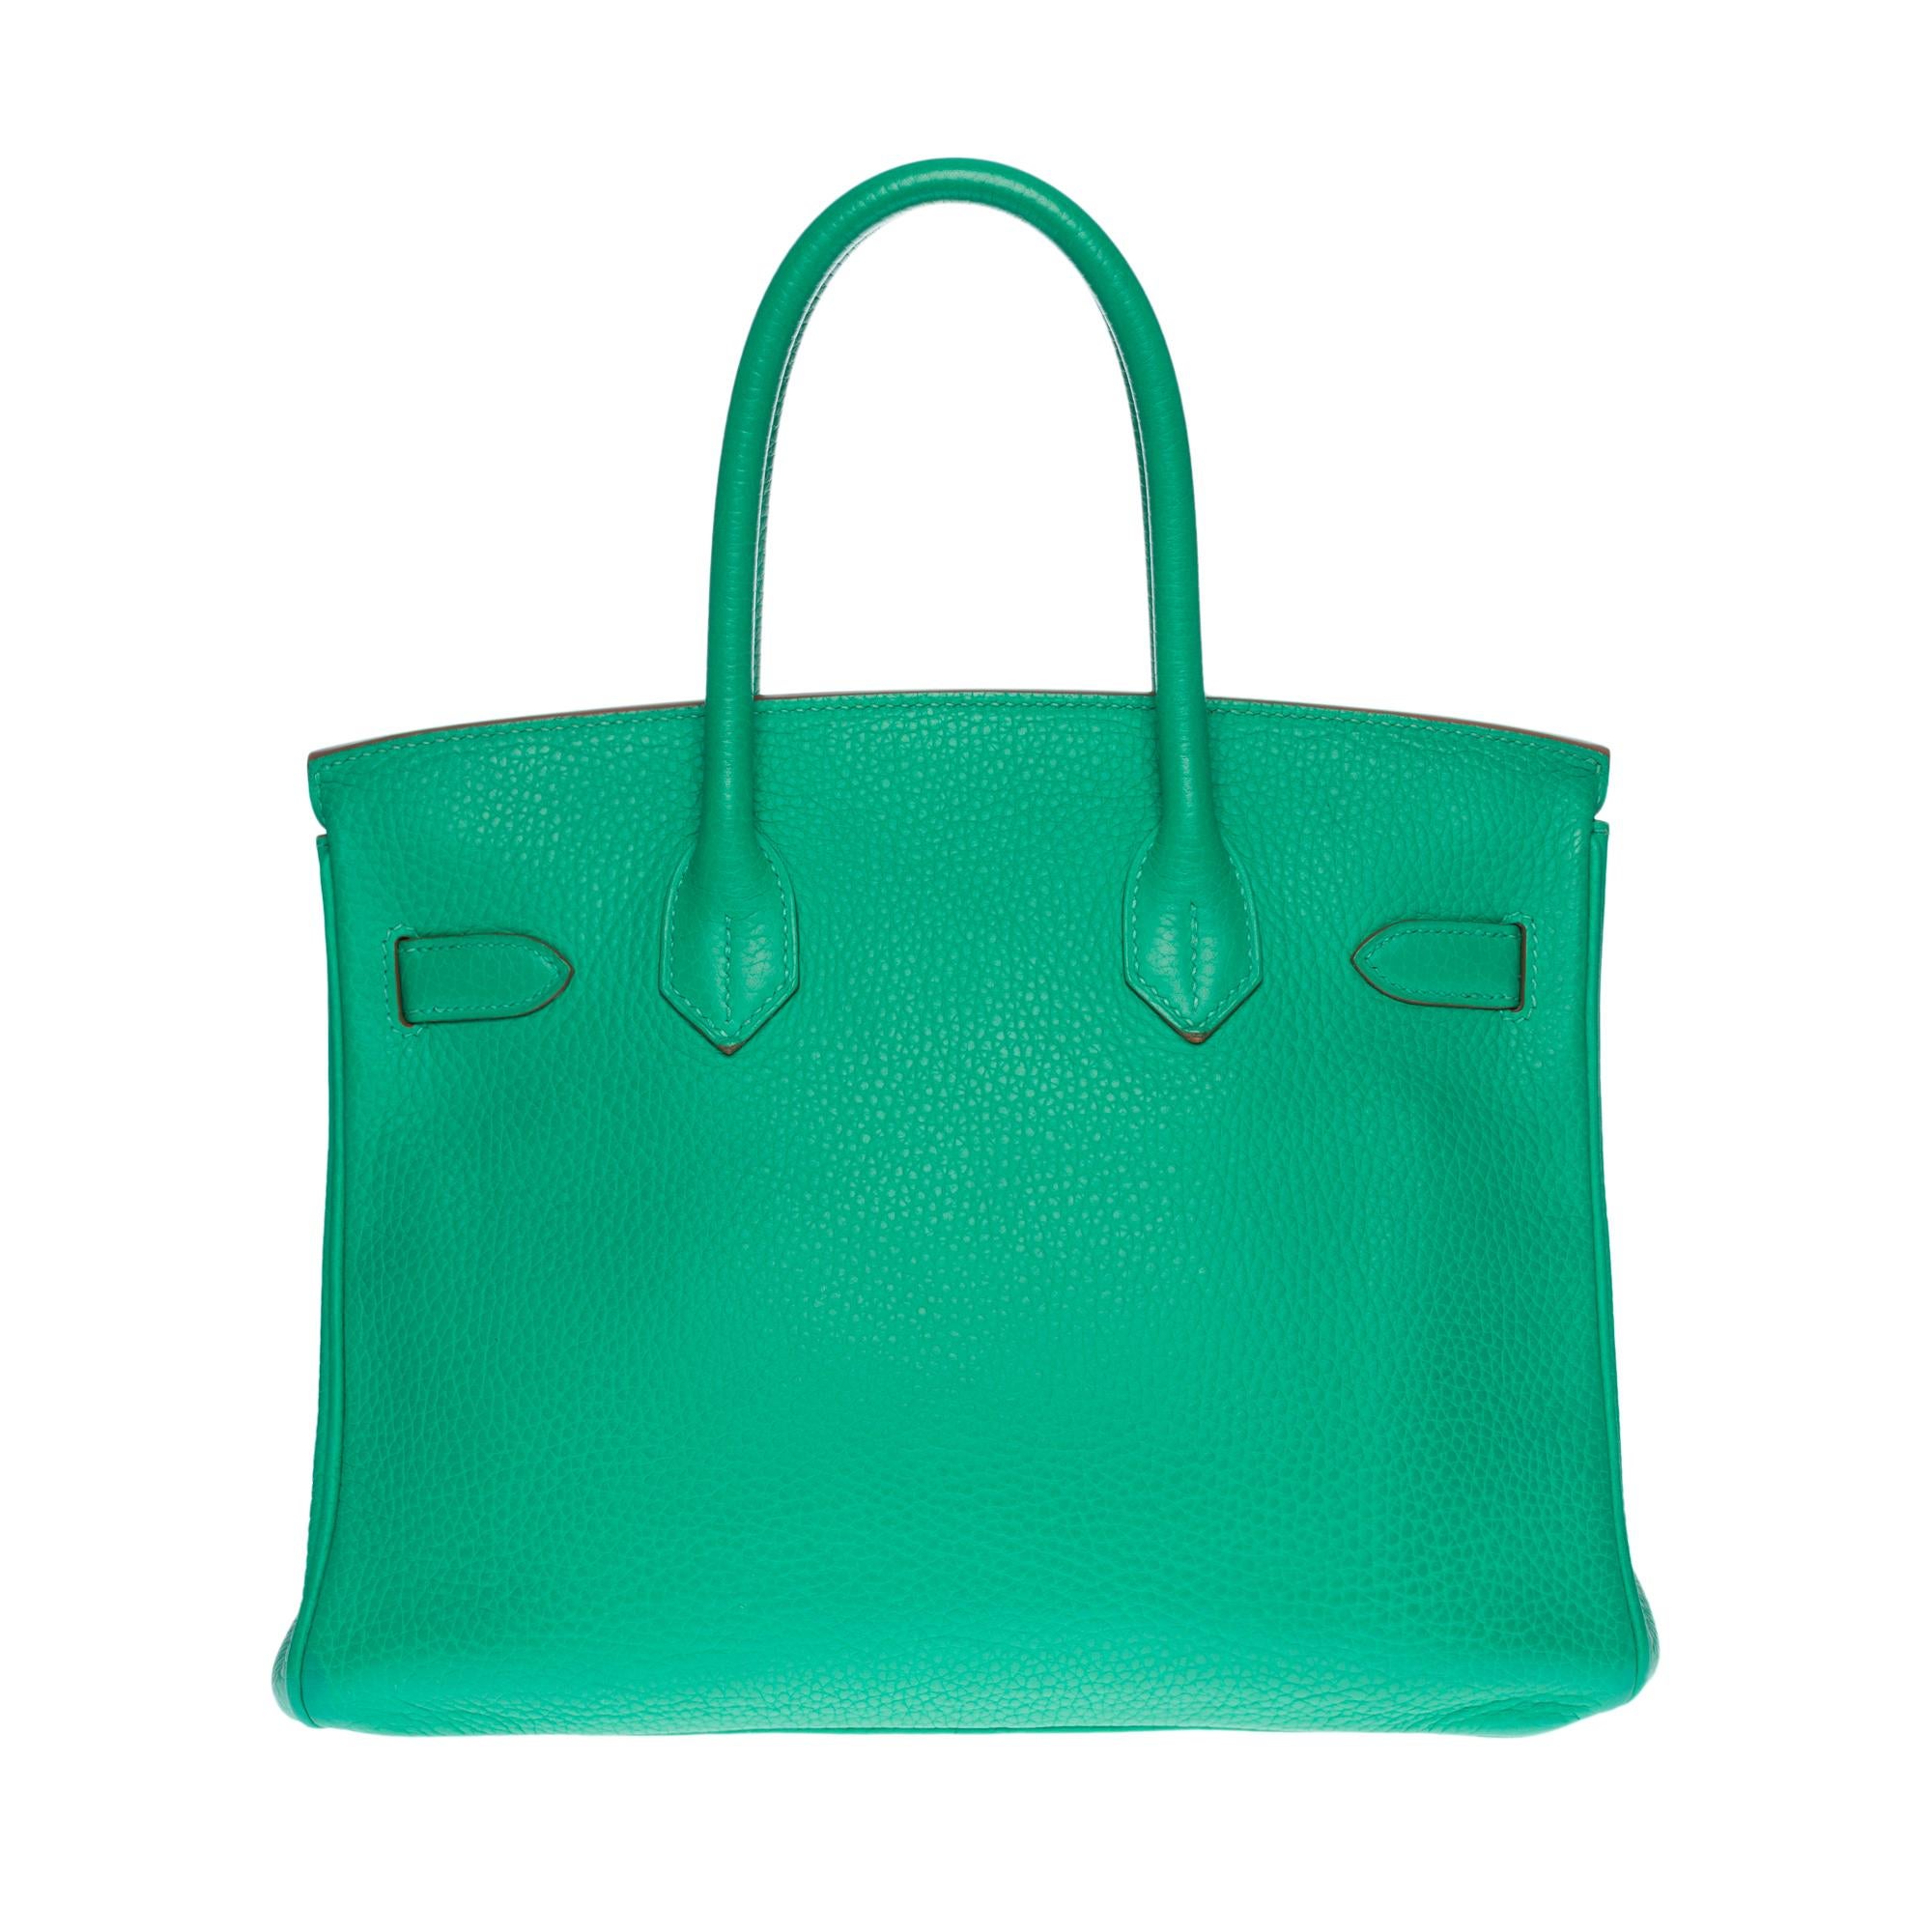 Splendid and bright Hermes Birkin 30 handbag in Vert Menthe Taurillon Clémence leather, palladium silver metal hardware, double green leather handle allowing a hand carry

Flap closure
Green leather lining, one zippered pocket, one patch